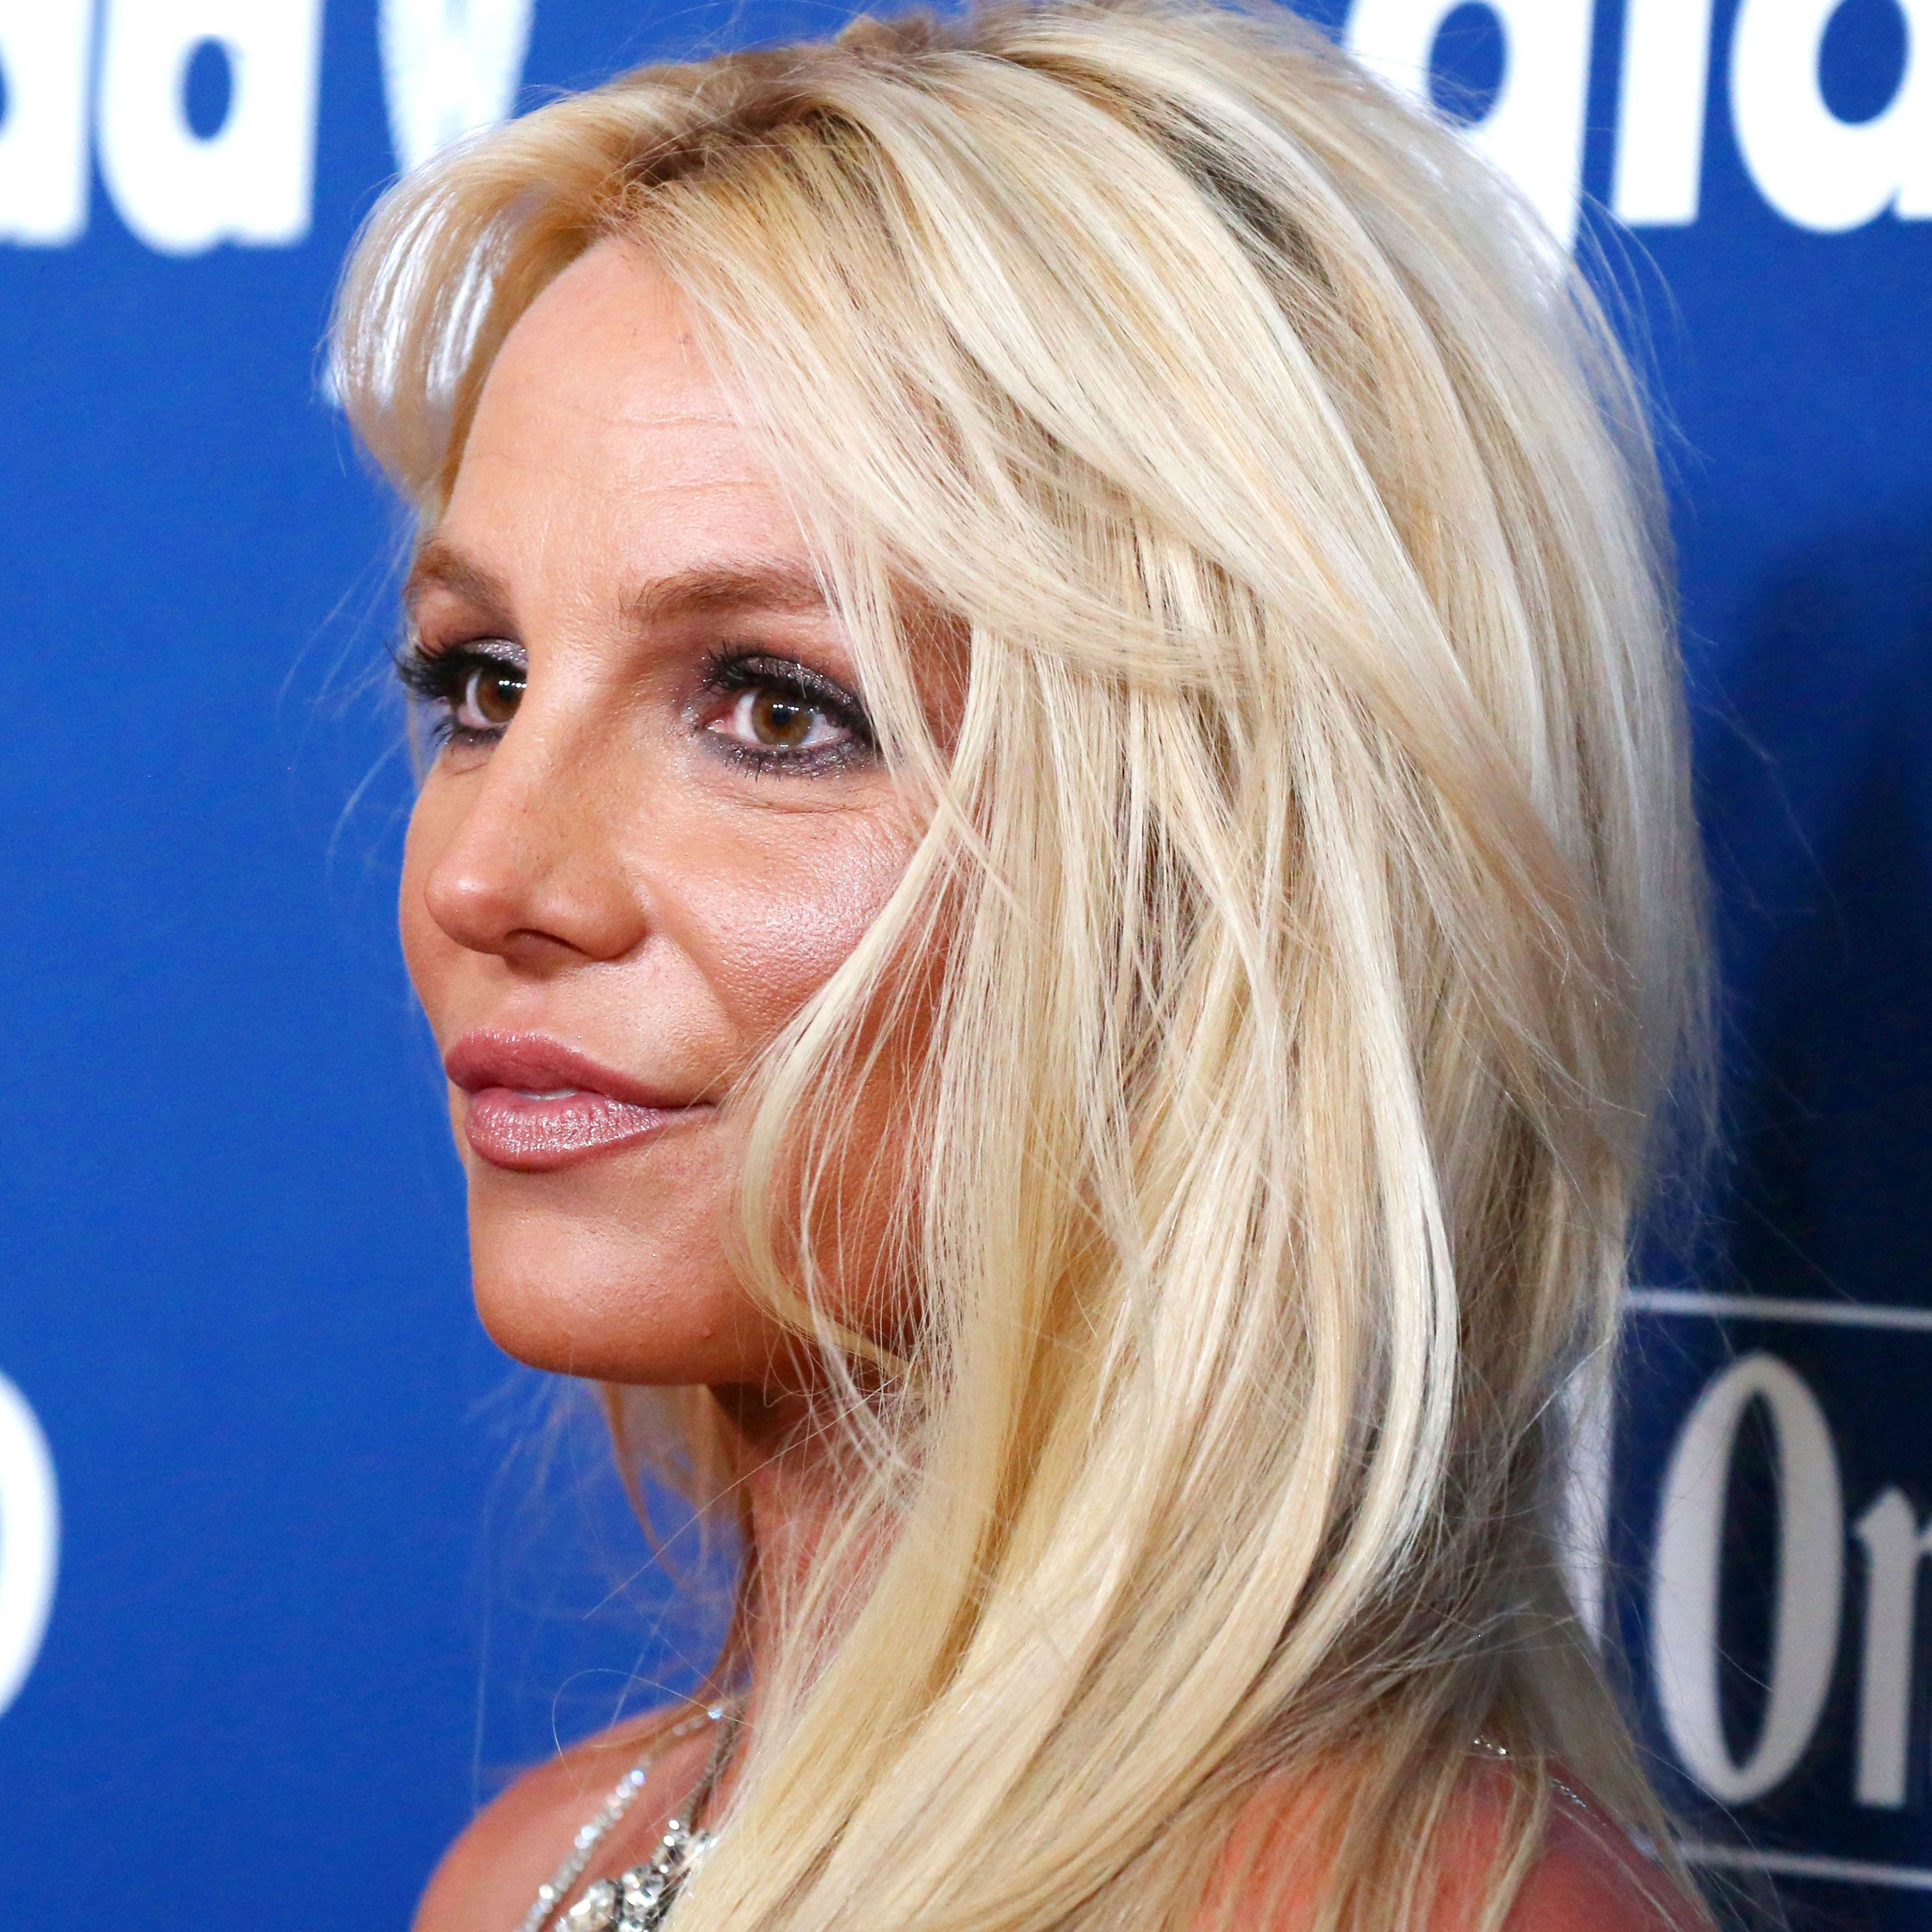 Britney Spears Accuses Dad of Financial Misconduct, Spying photo